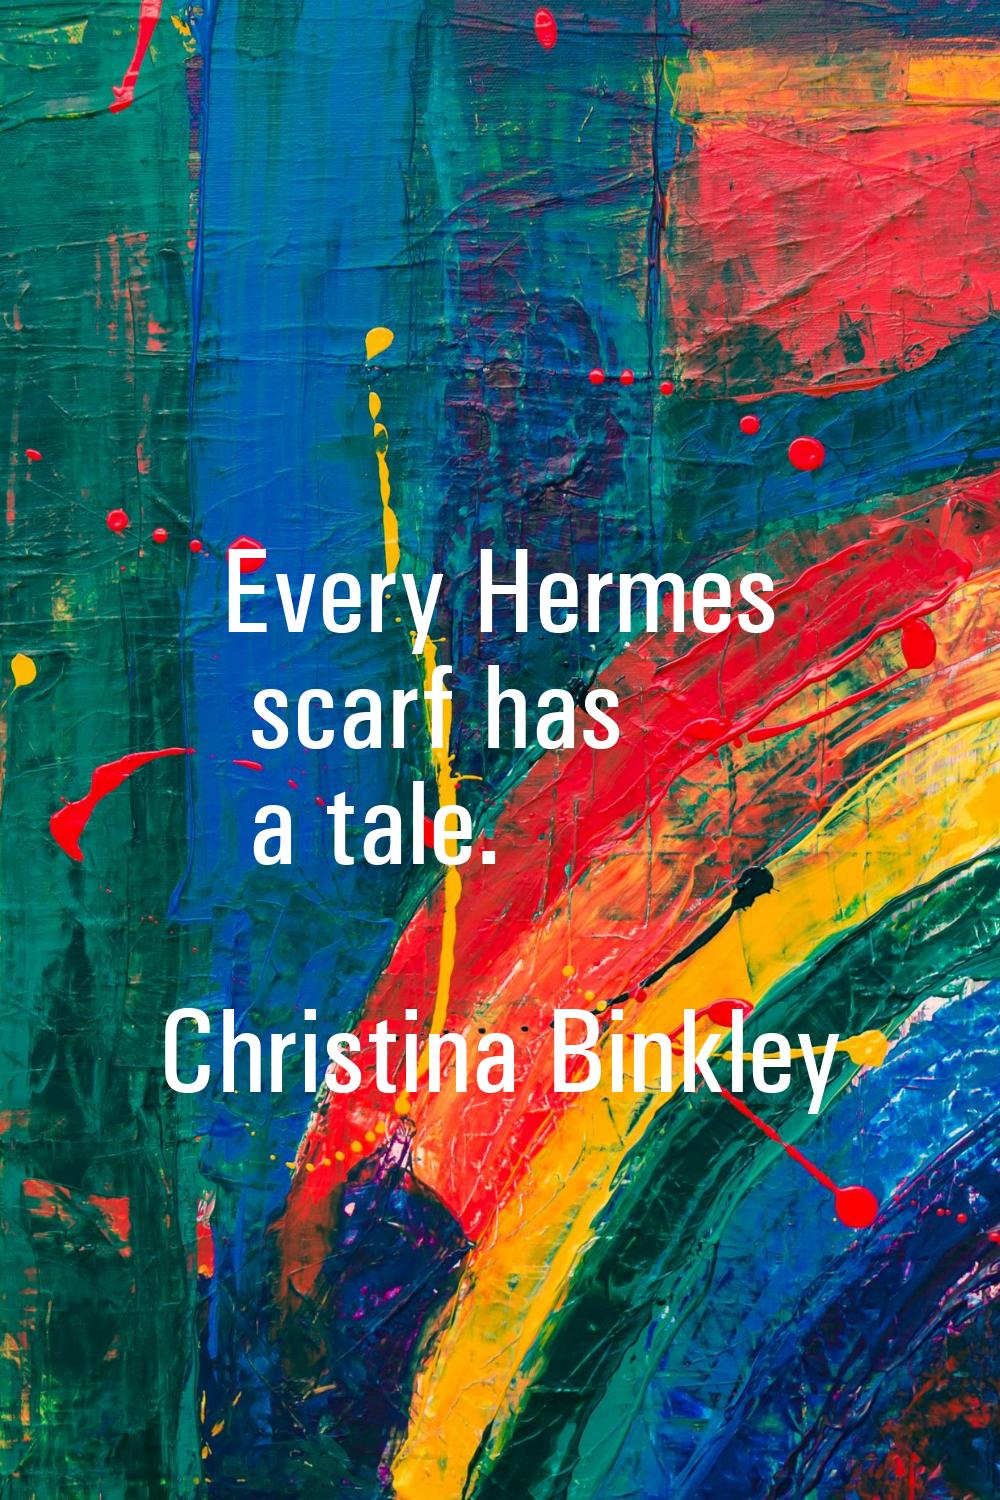 Every Hermes scarf has a tale.